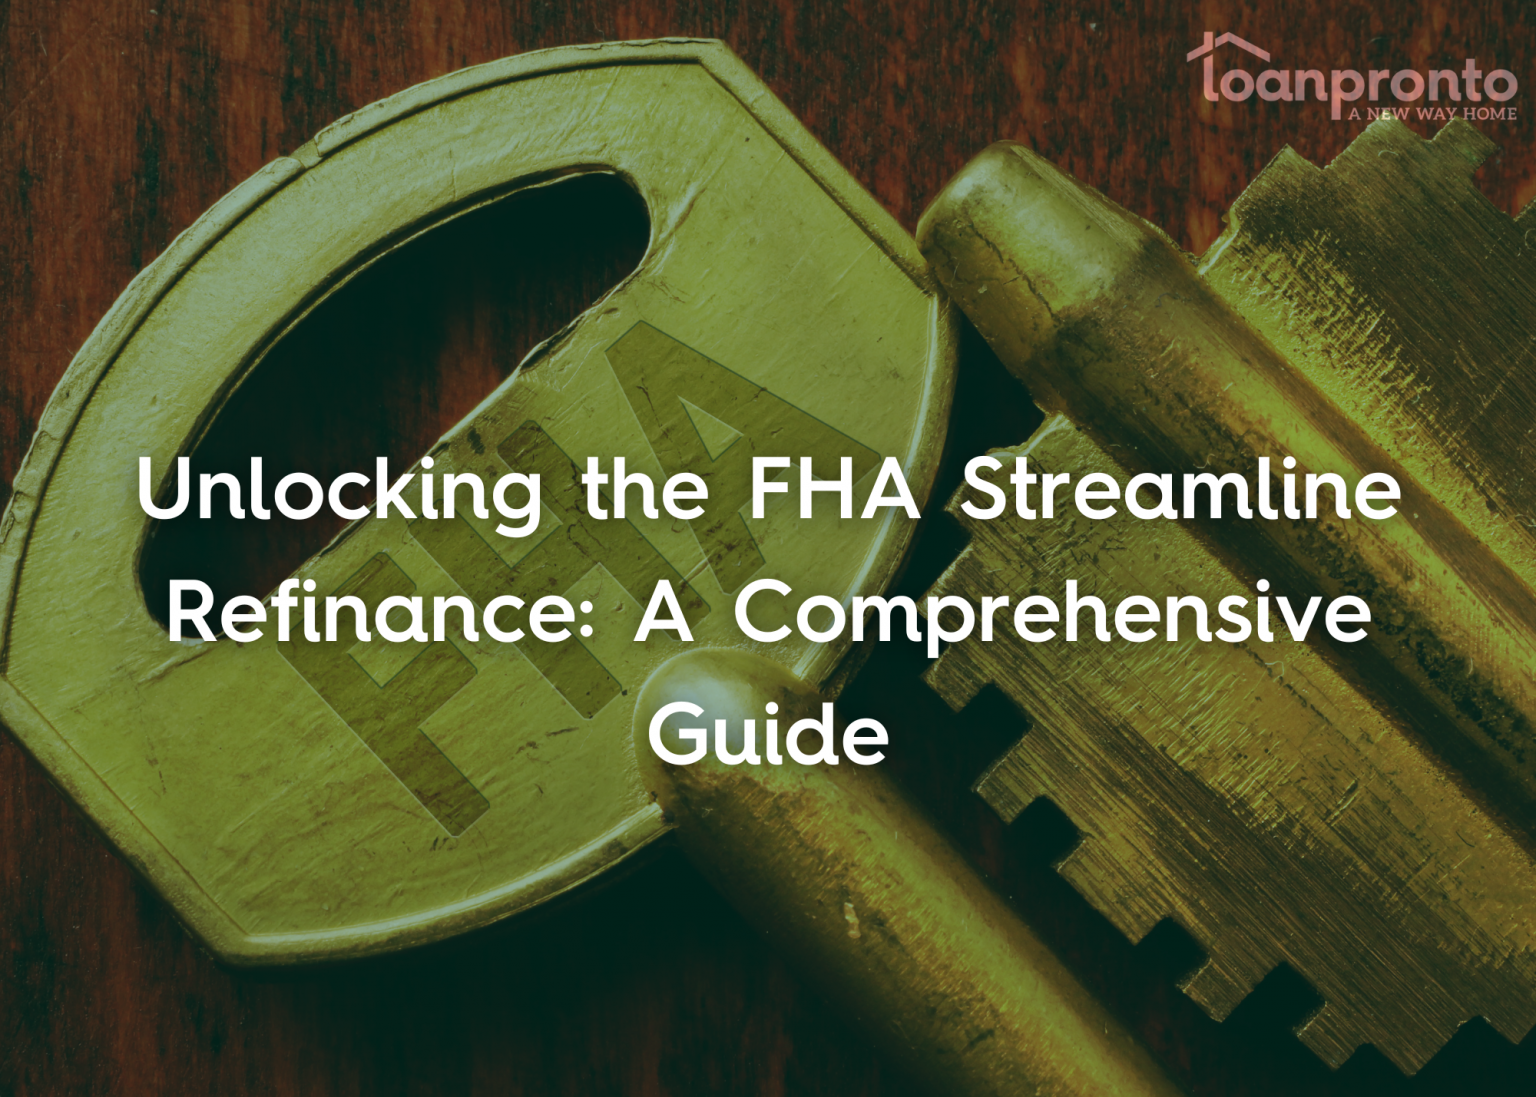 FHA streamline refinance for mortgage. no appraisal required.